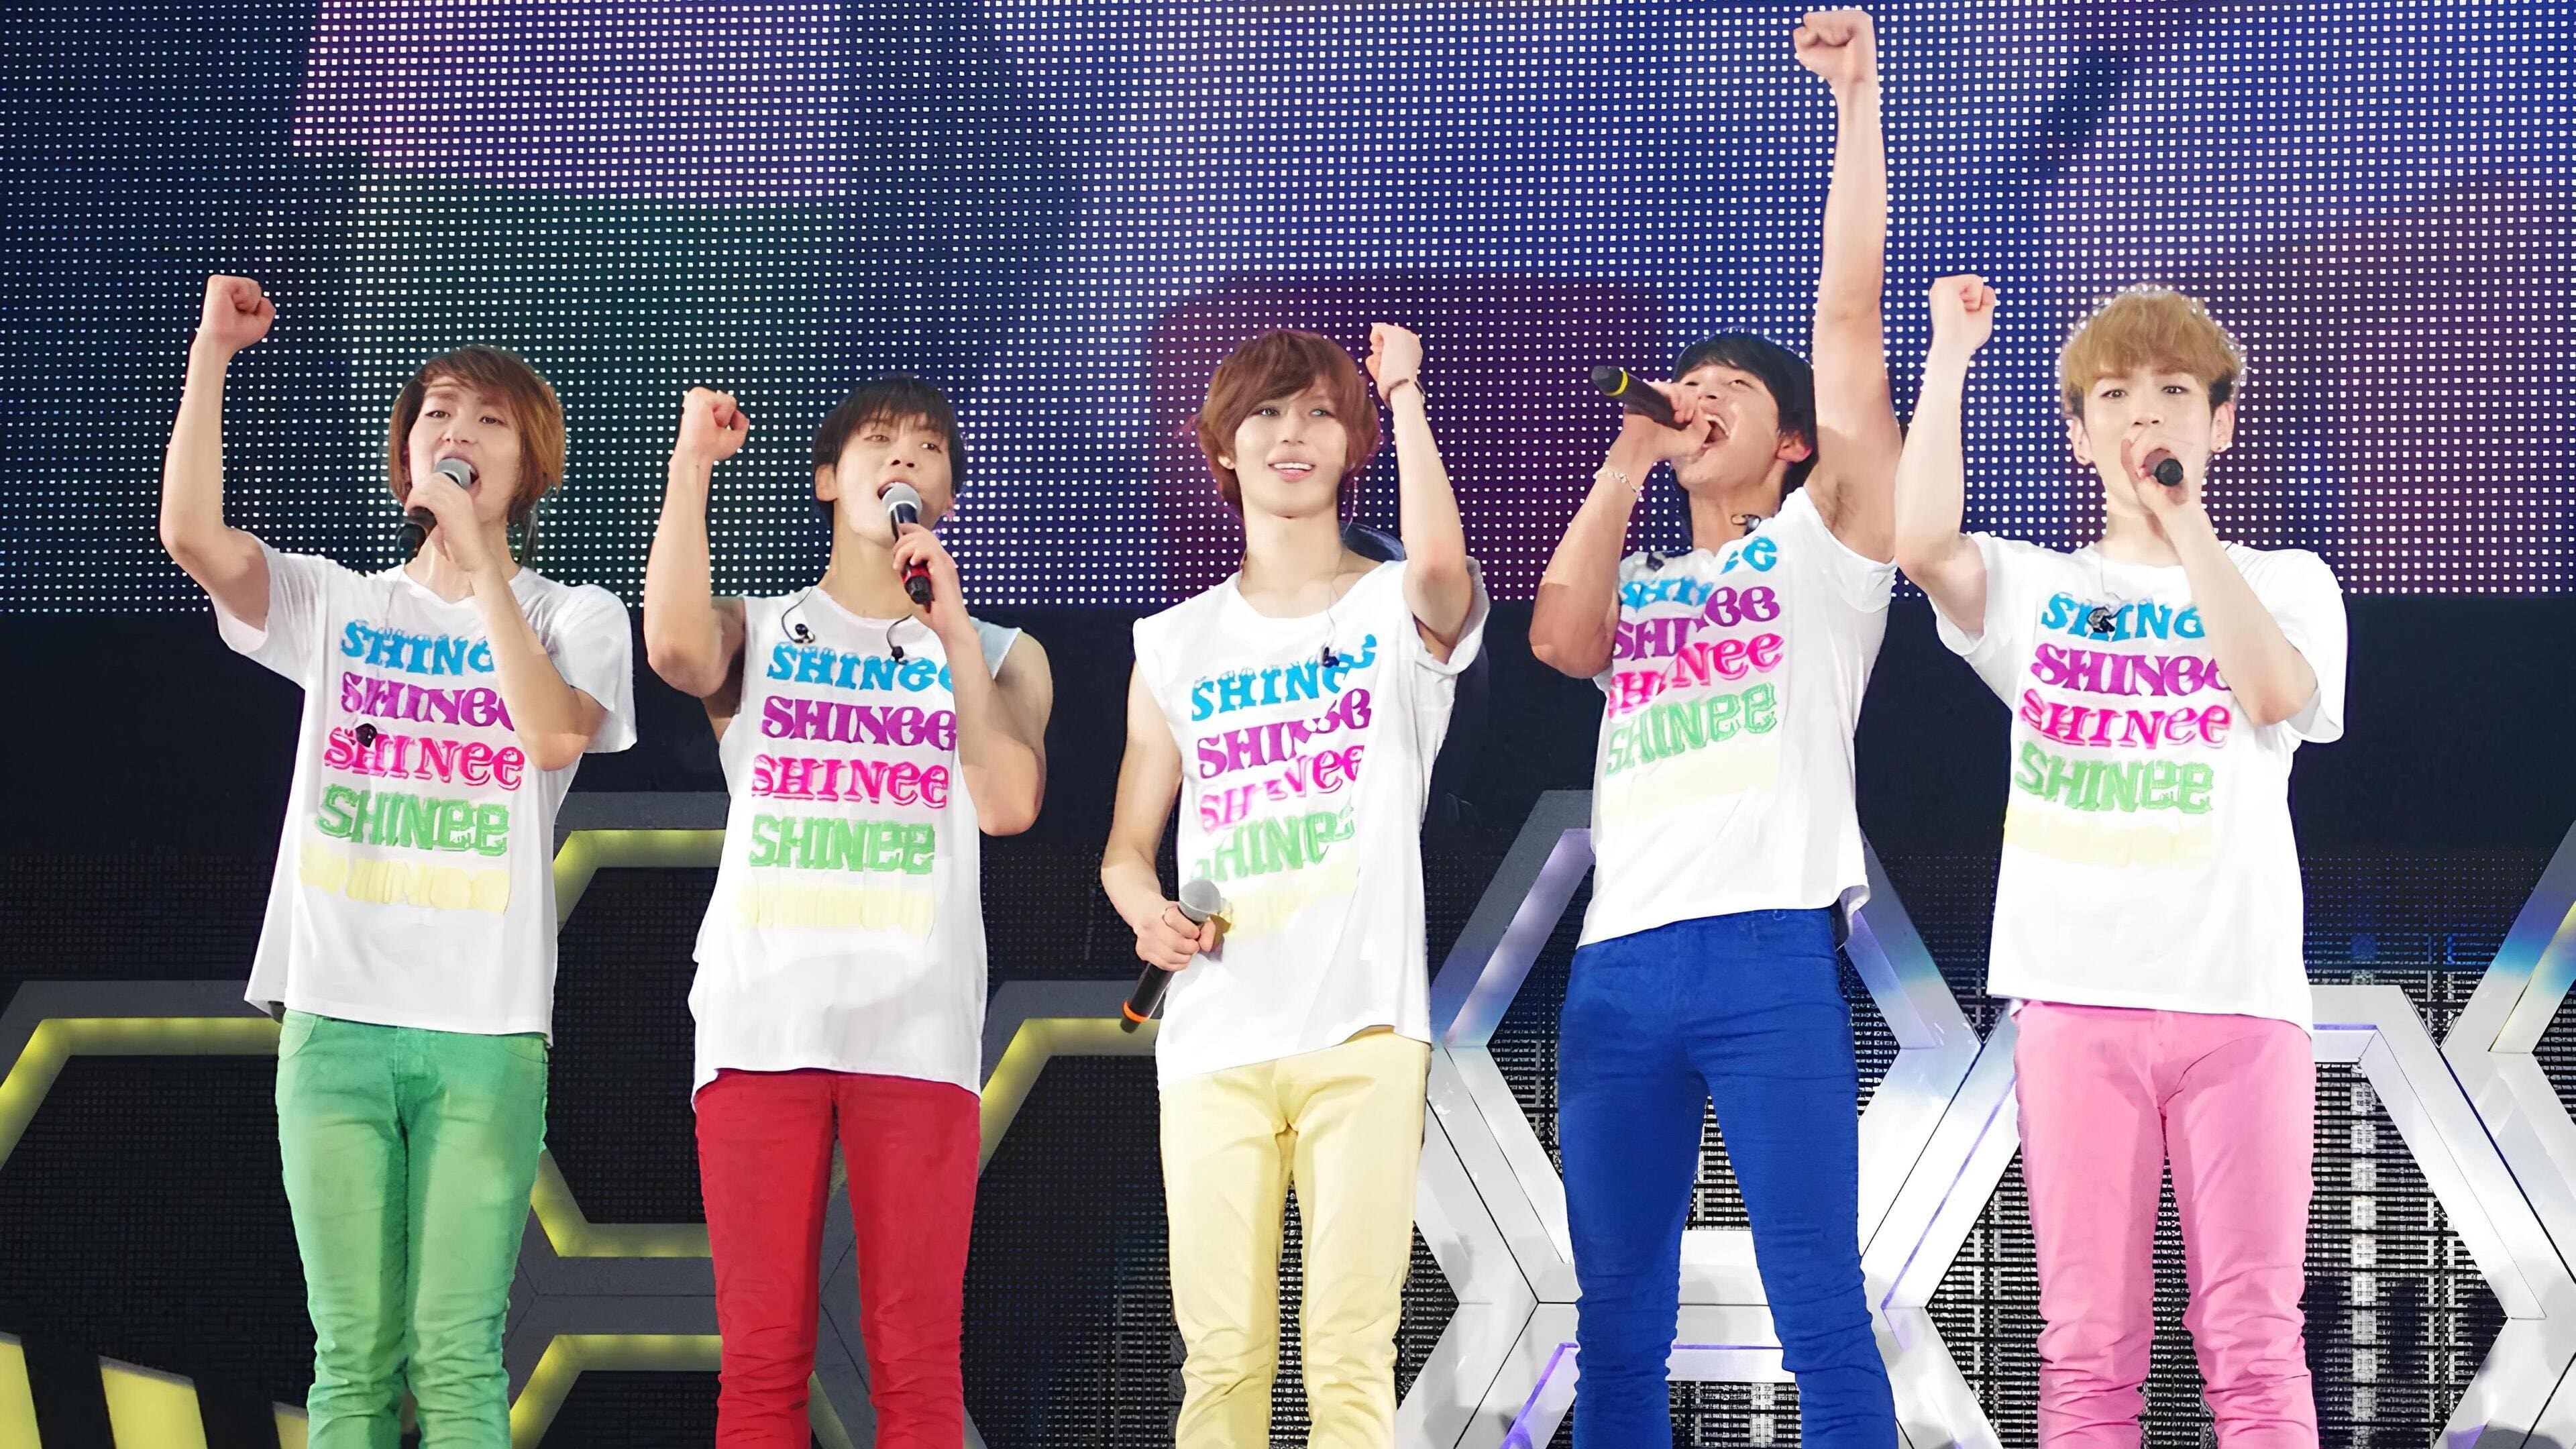 THE FIRST JAPAN ARENA TOUR "SHINee WORLD 2012"